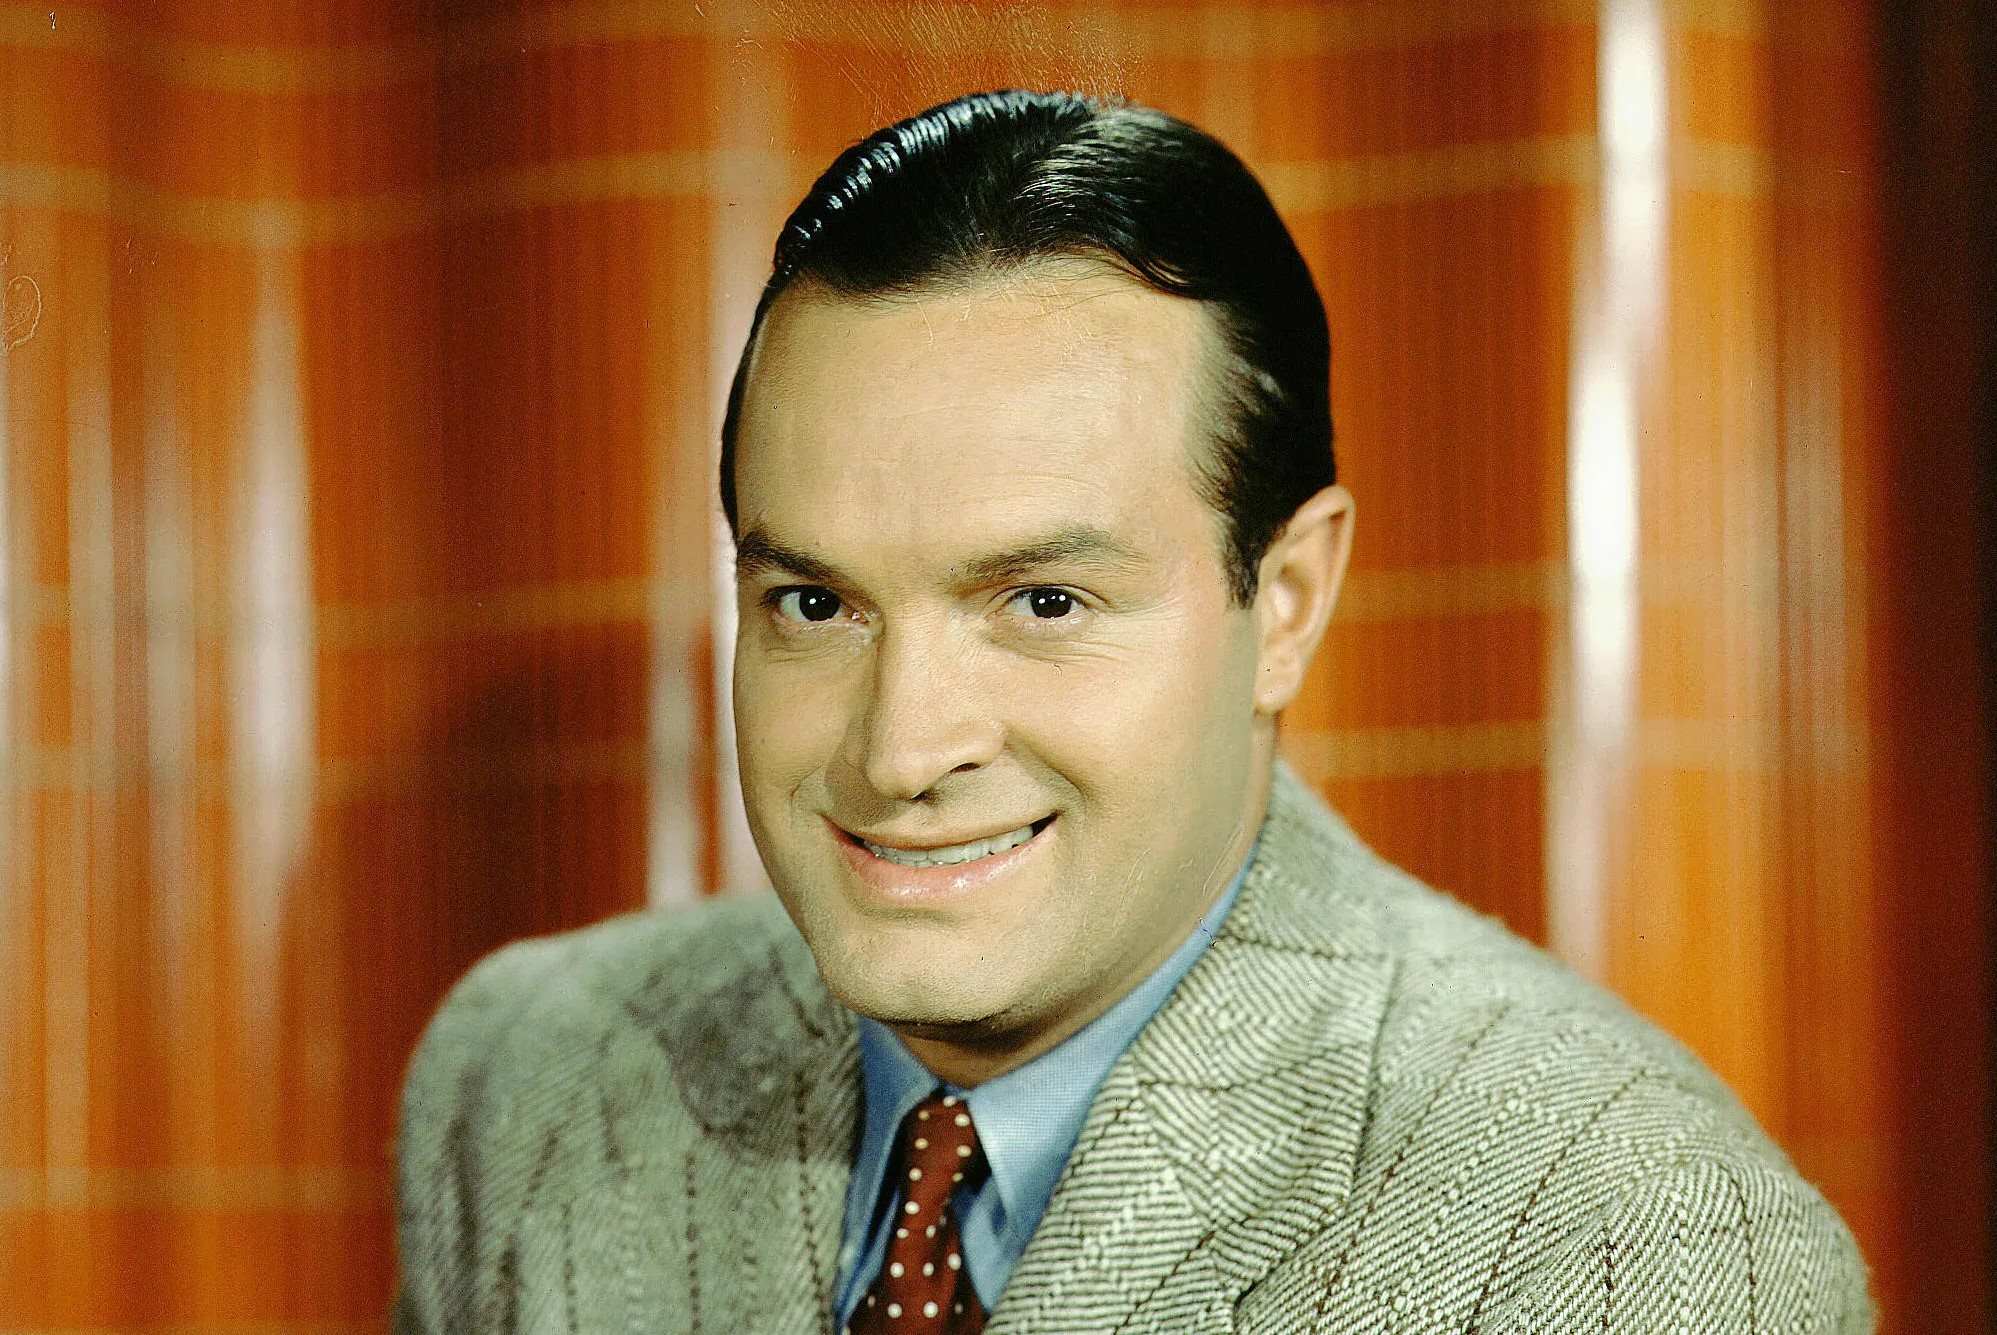 18 Intriguing Facts About Bob Hope - Facts.net